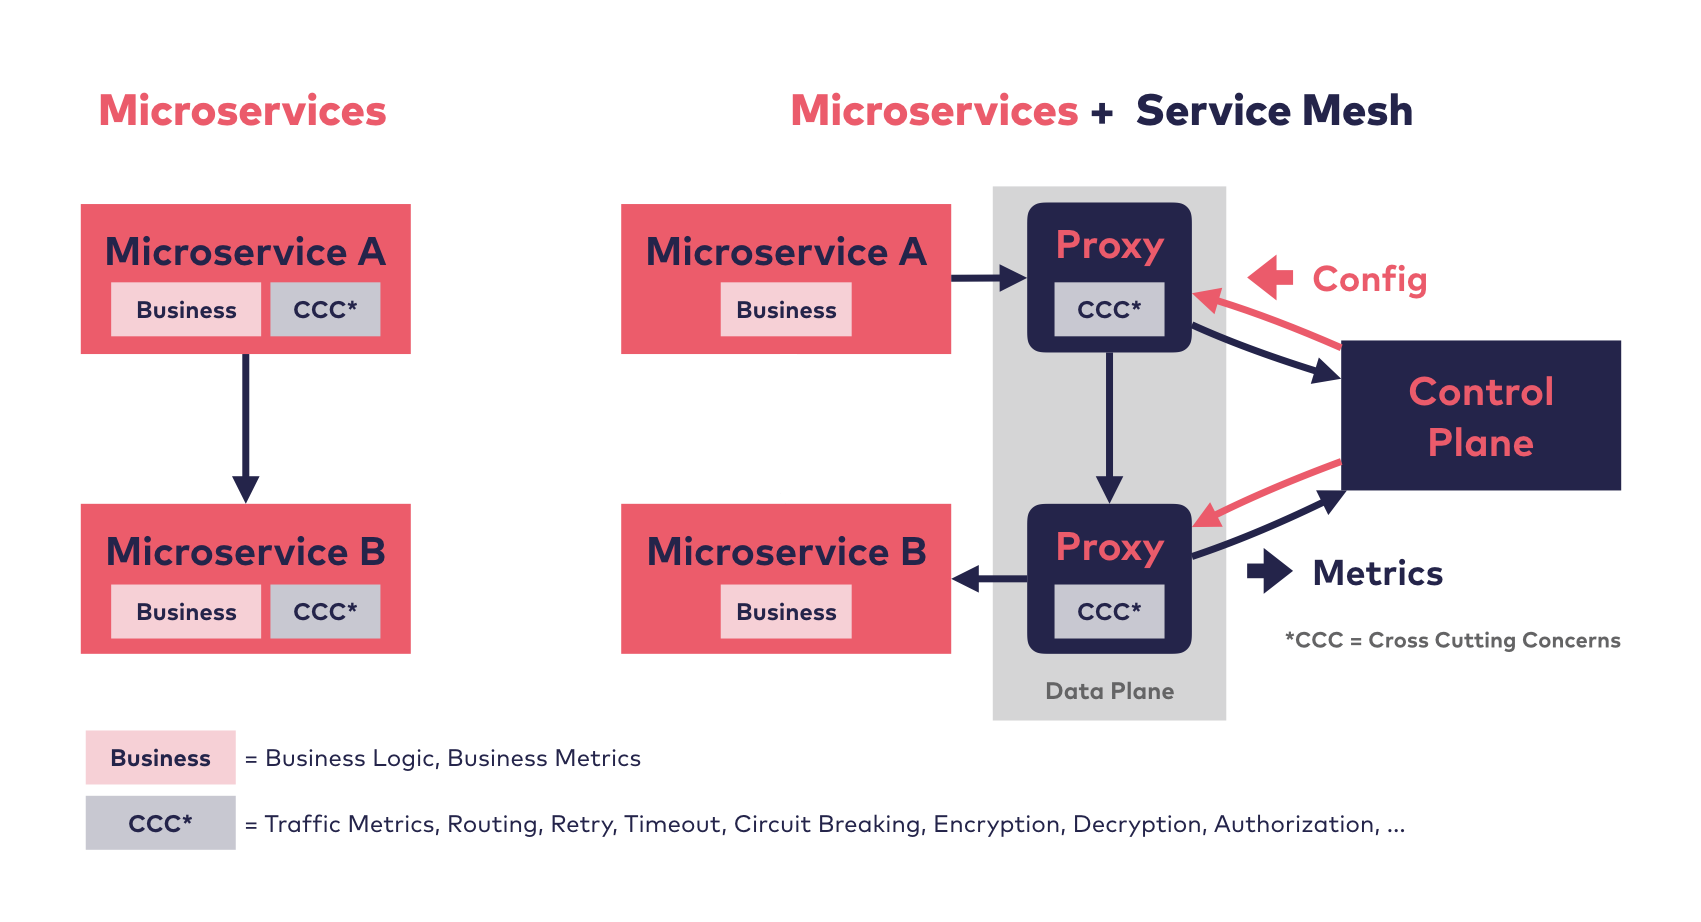 An image showing a comparison of a two-service microservice architecture with and without a Service Mesh.